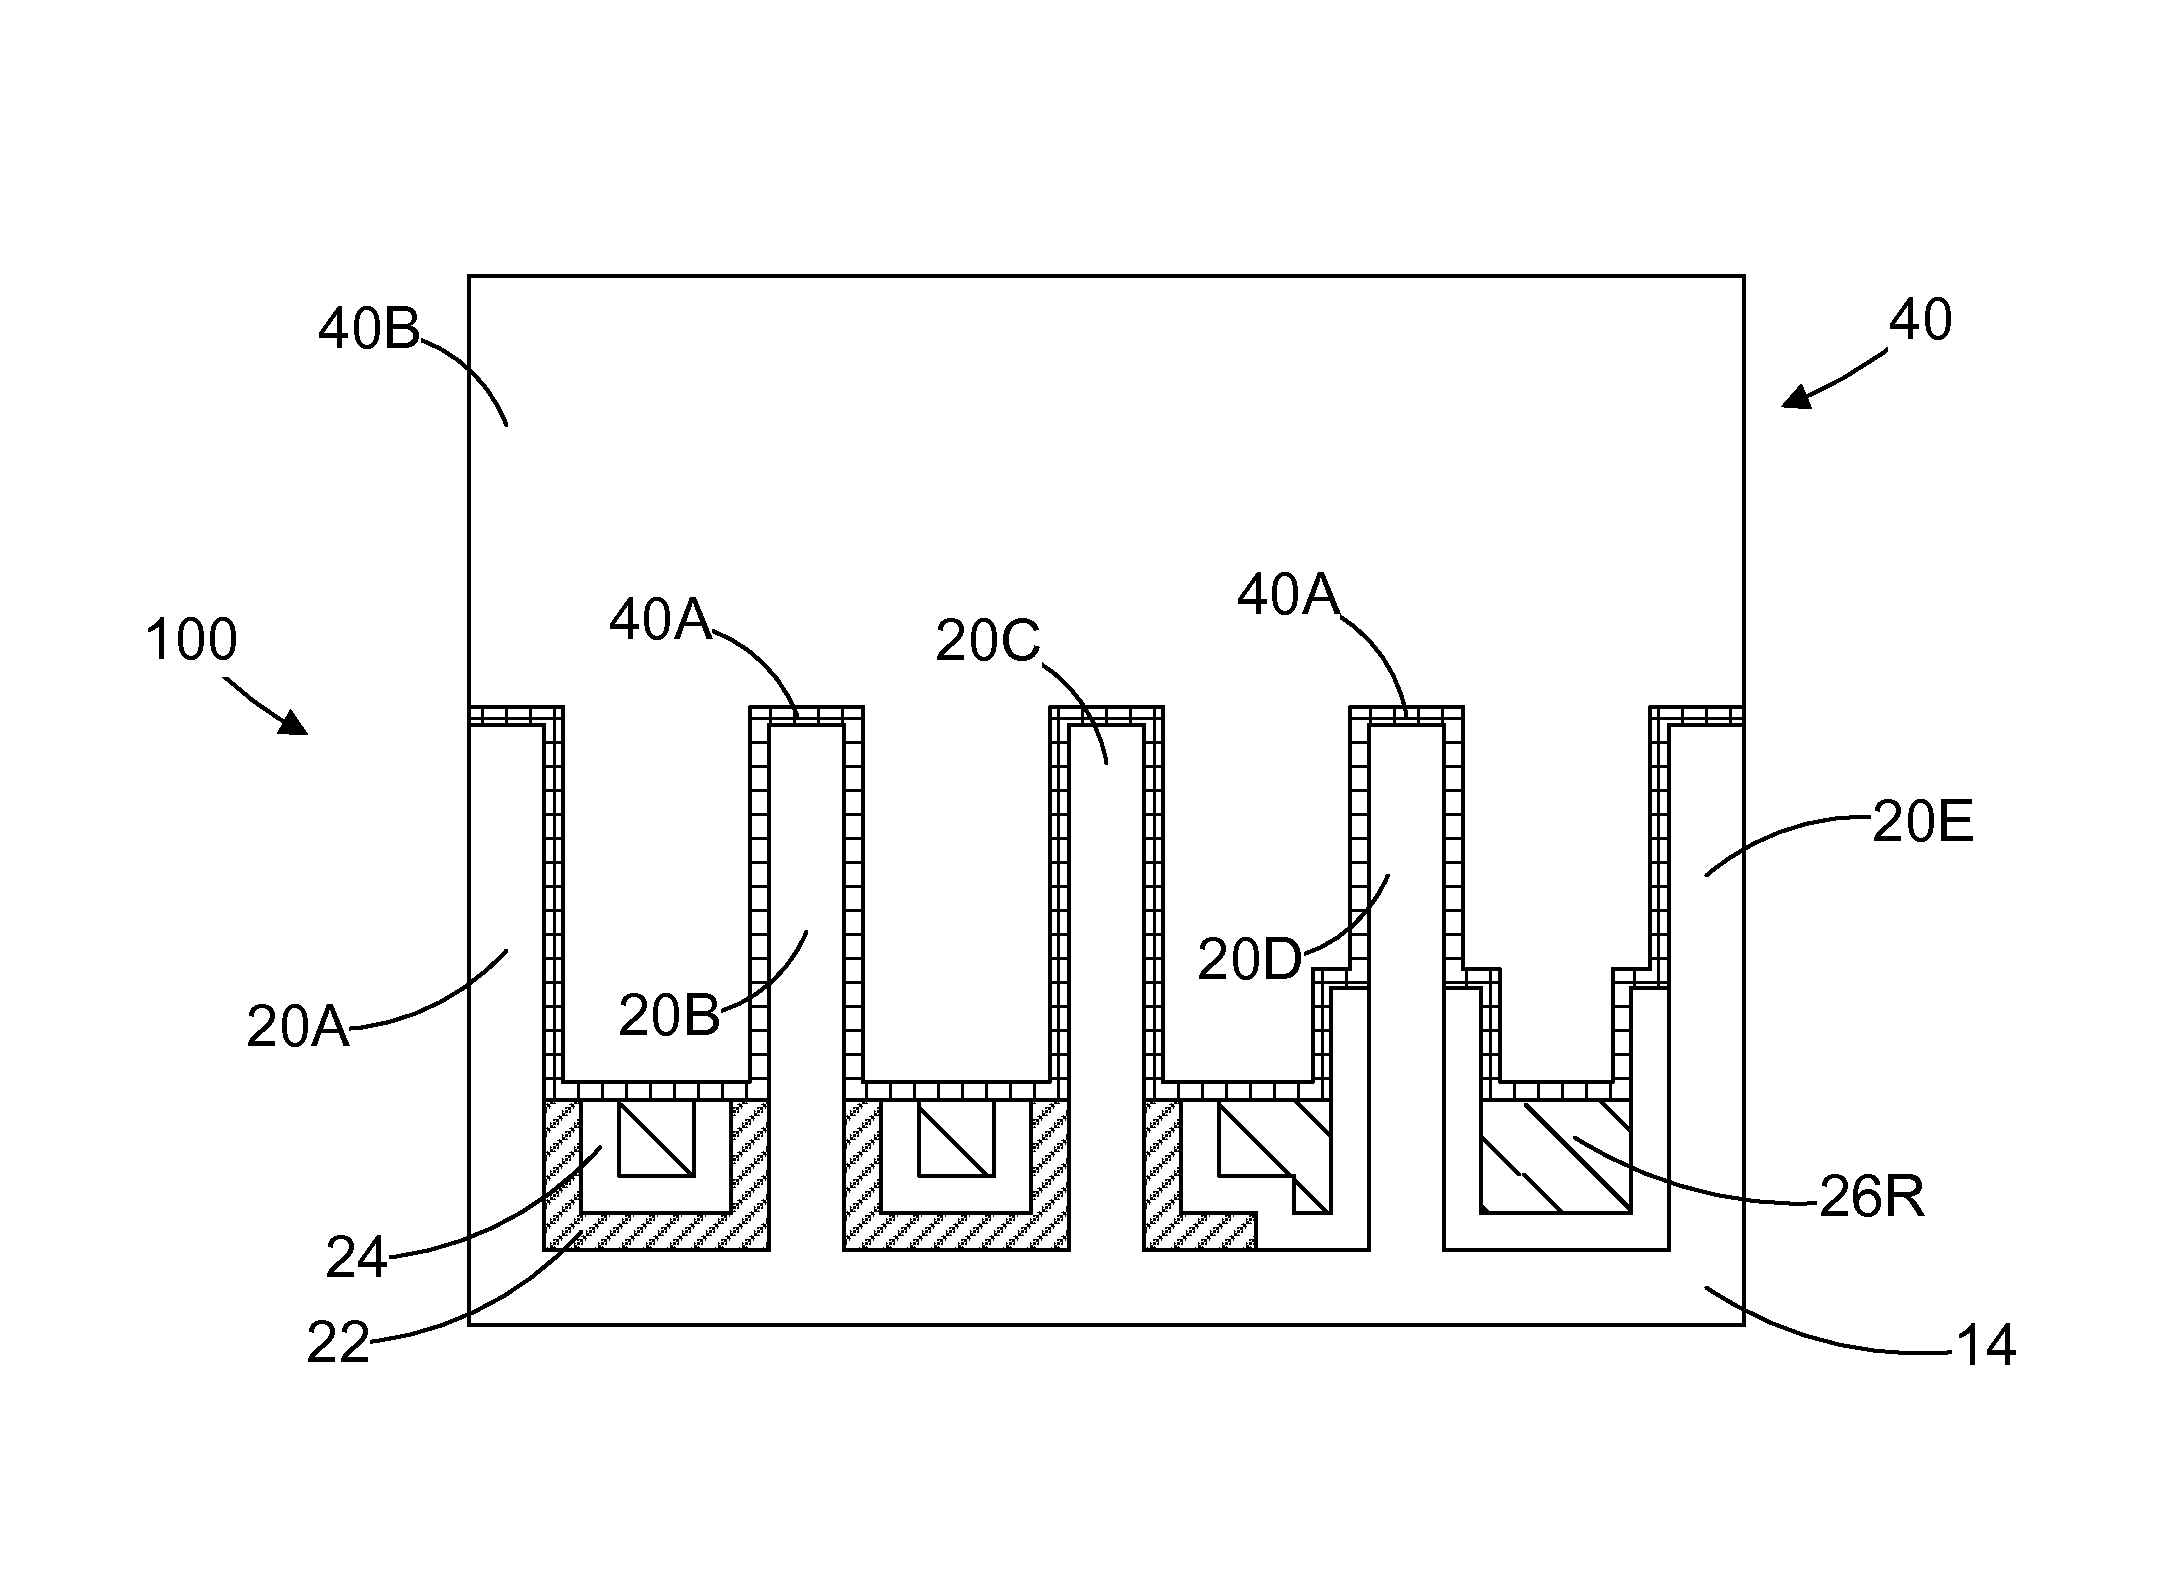 Methods of forming bulk finfet devices by performing a recessing process on liner materials to define different fin heights and finfet devices with such recessed liner materials